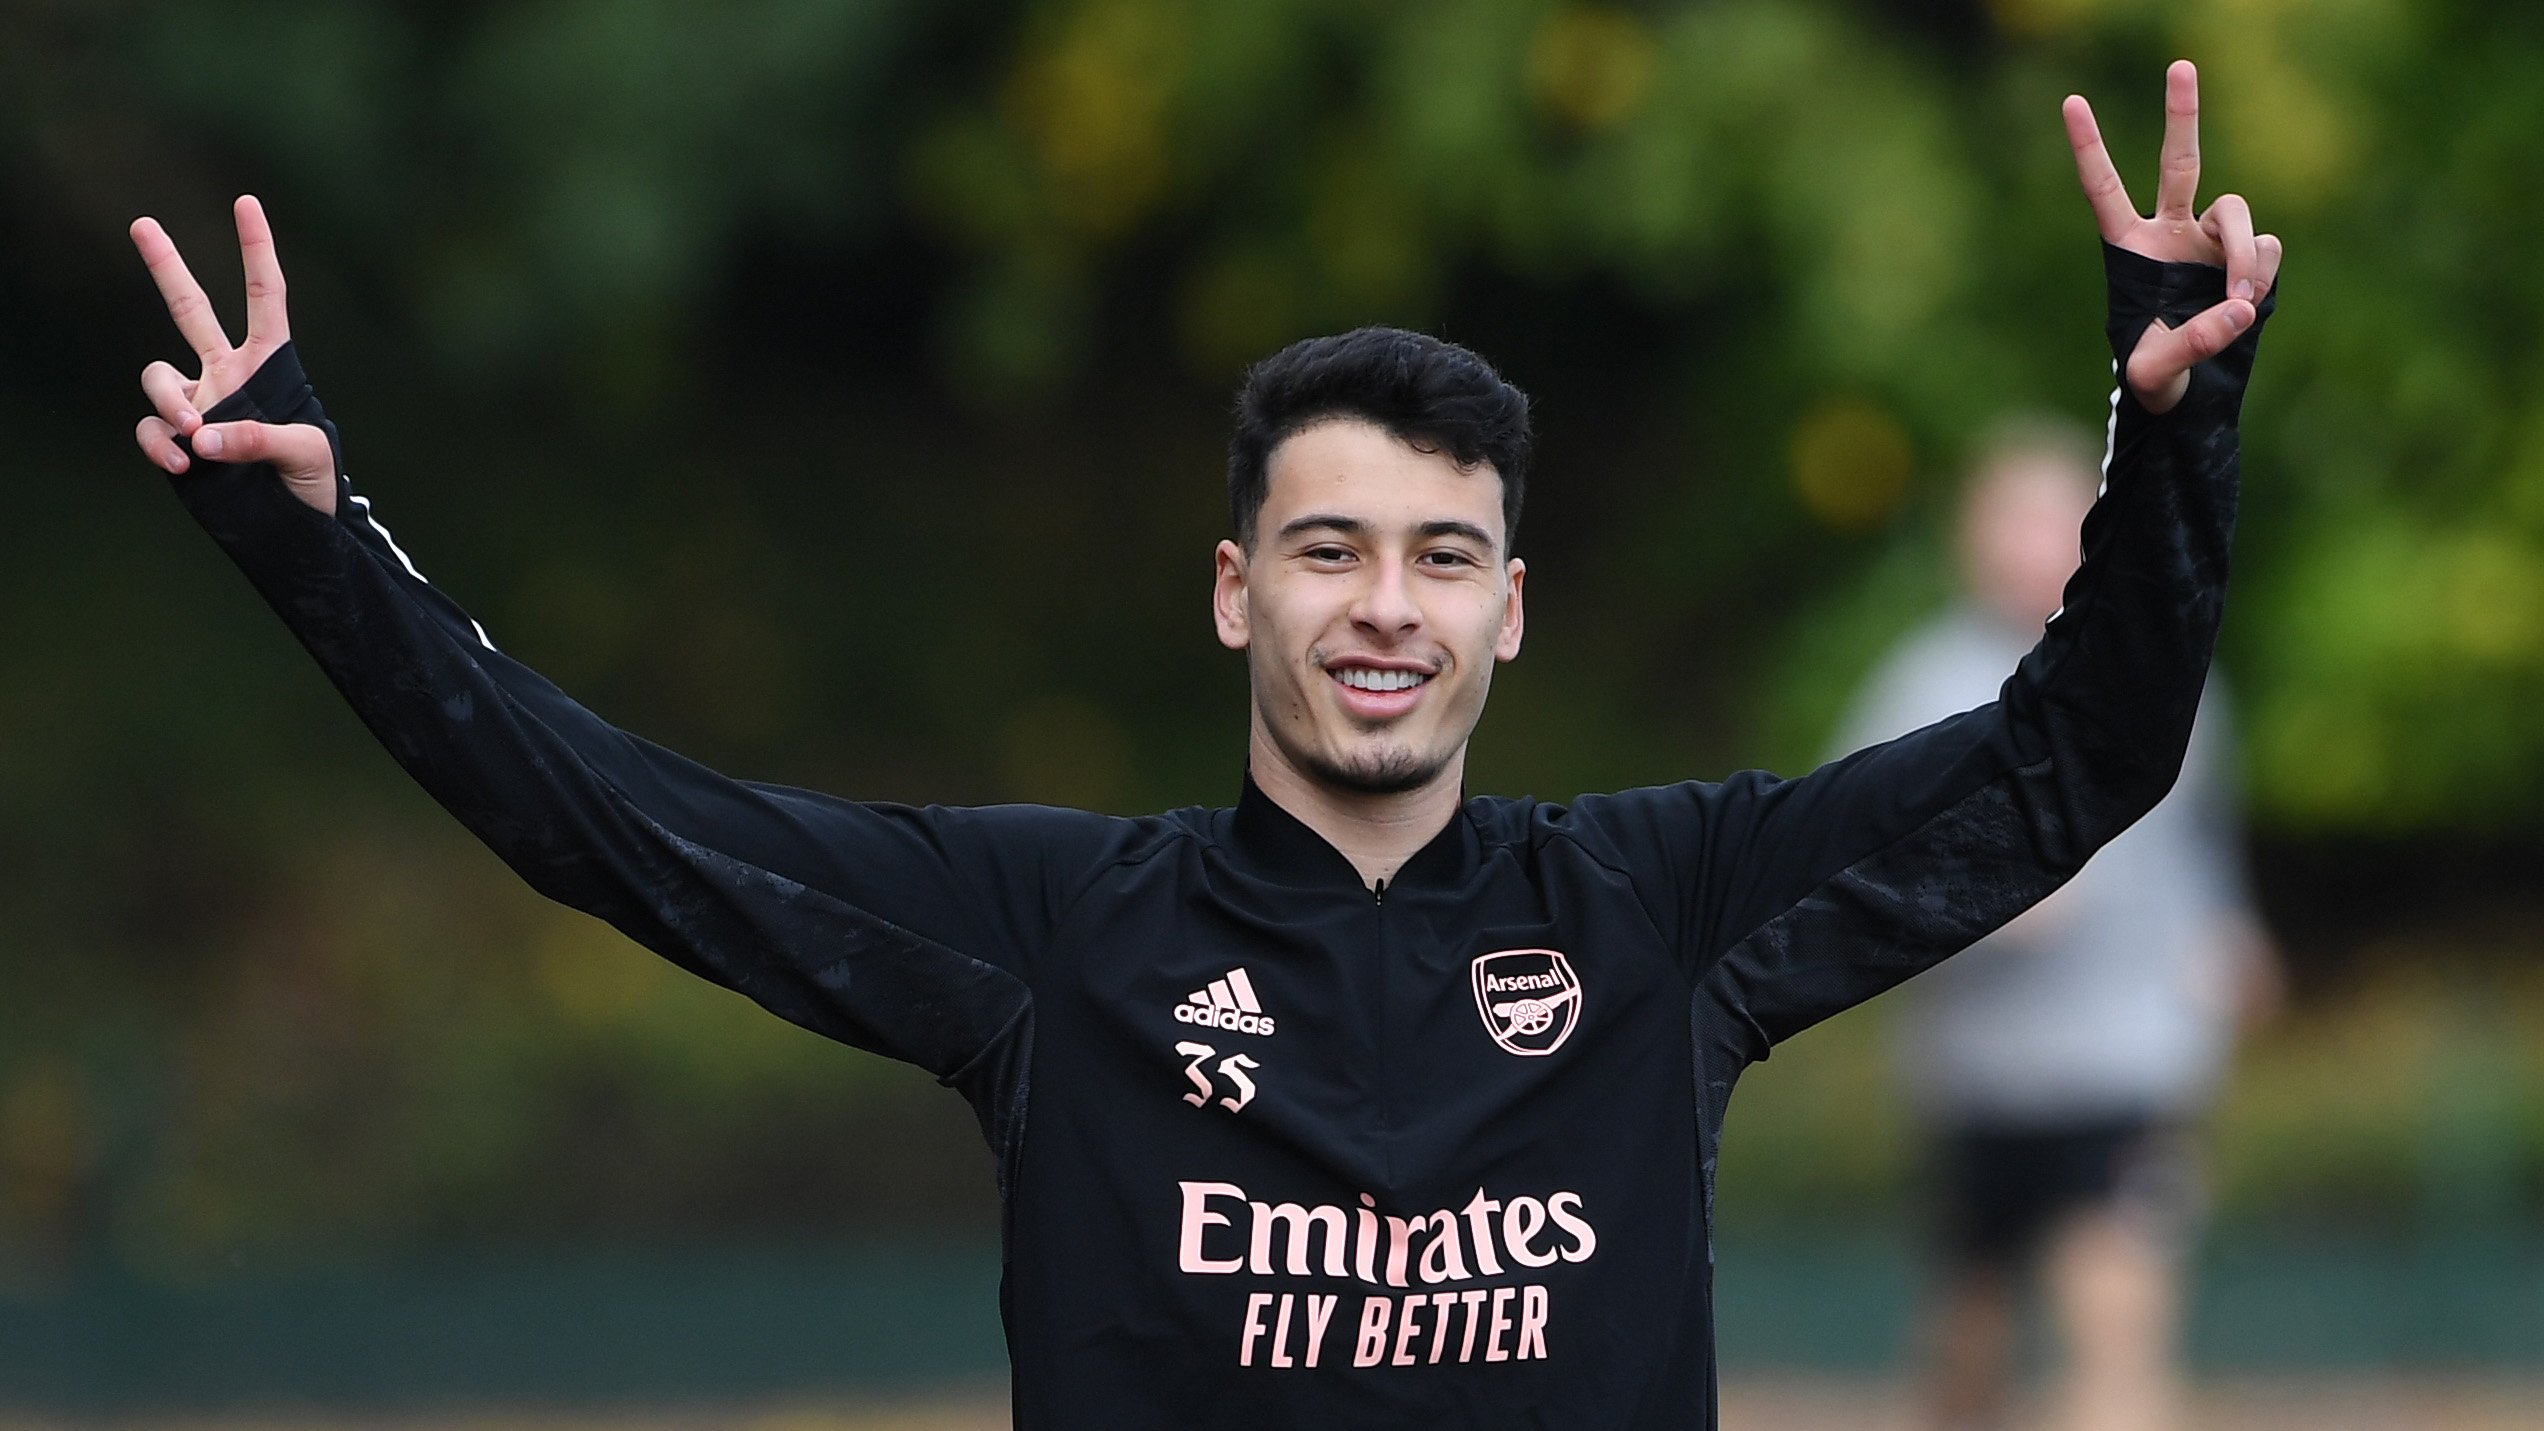 If I can I will stay at Arsenal my whole life, proclaims Gabriel Martinelli